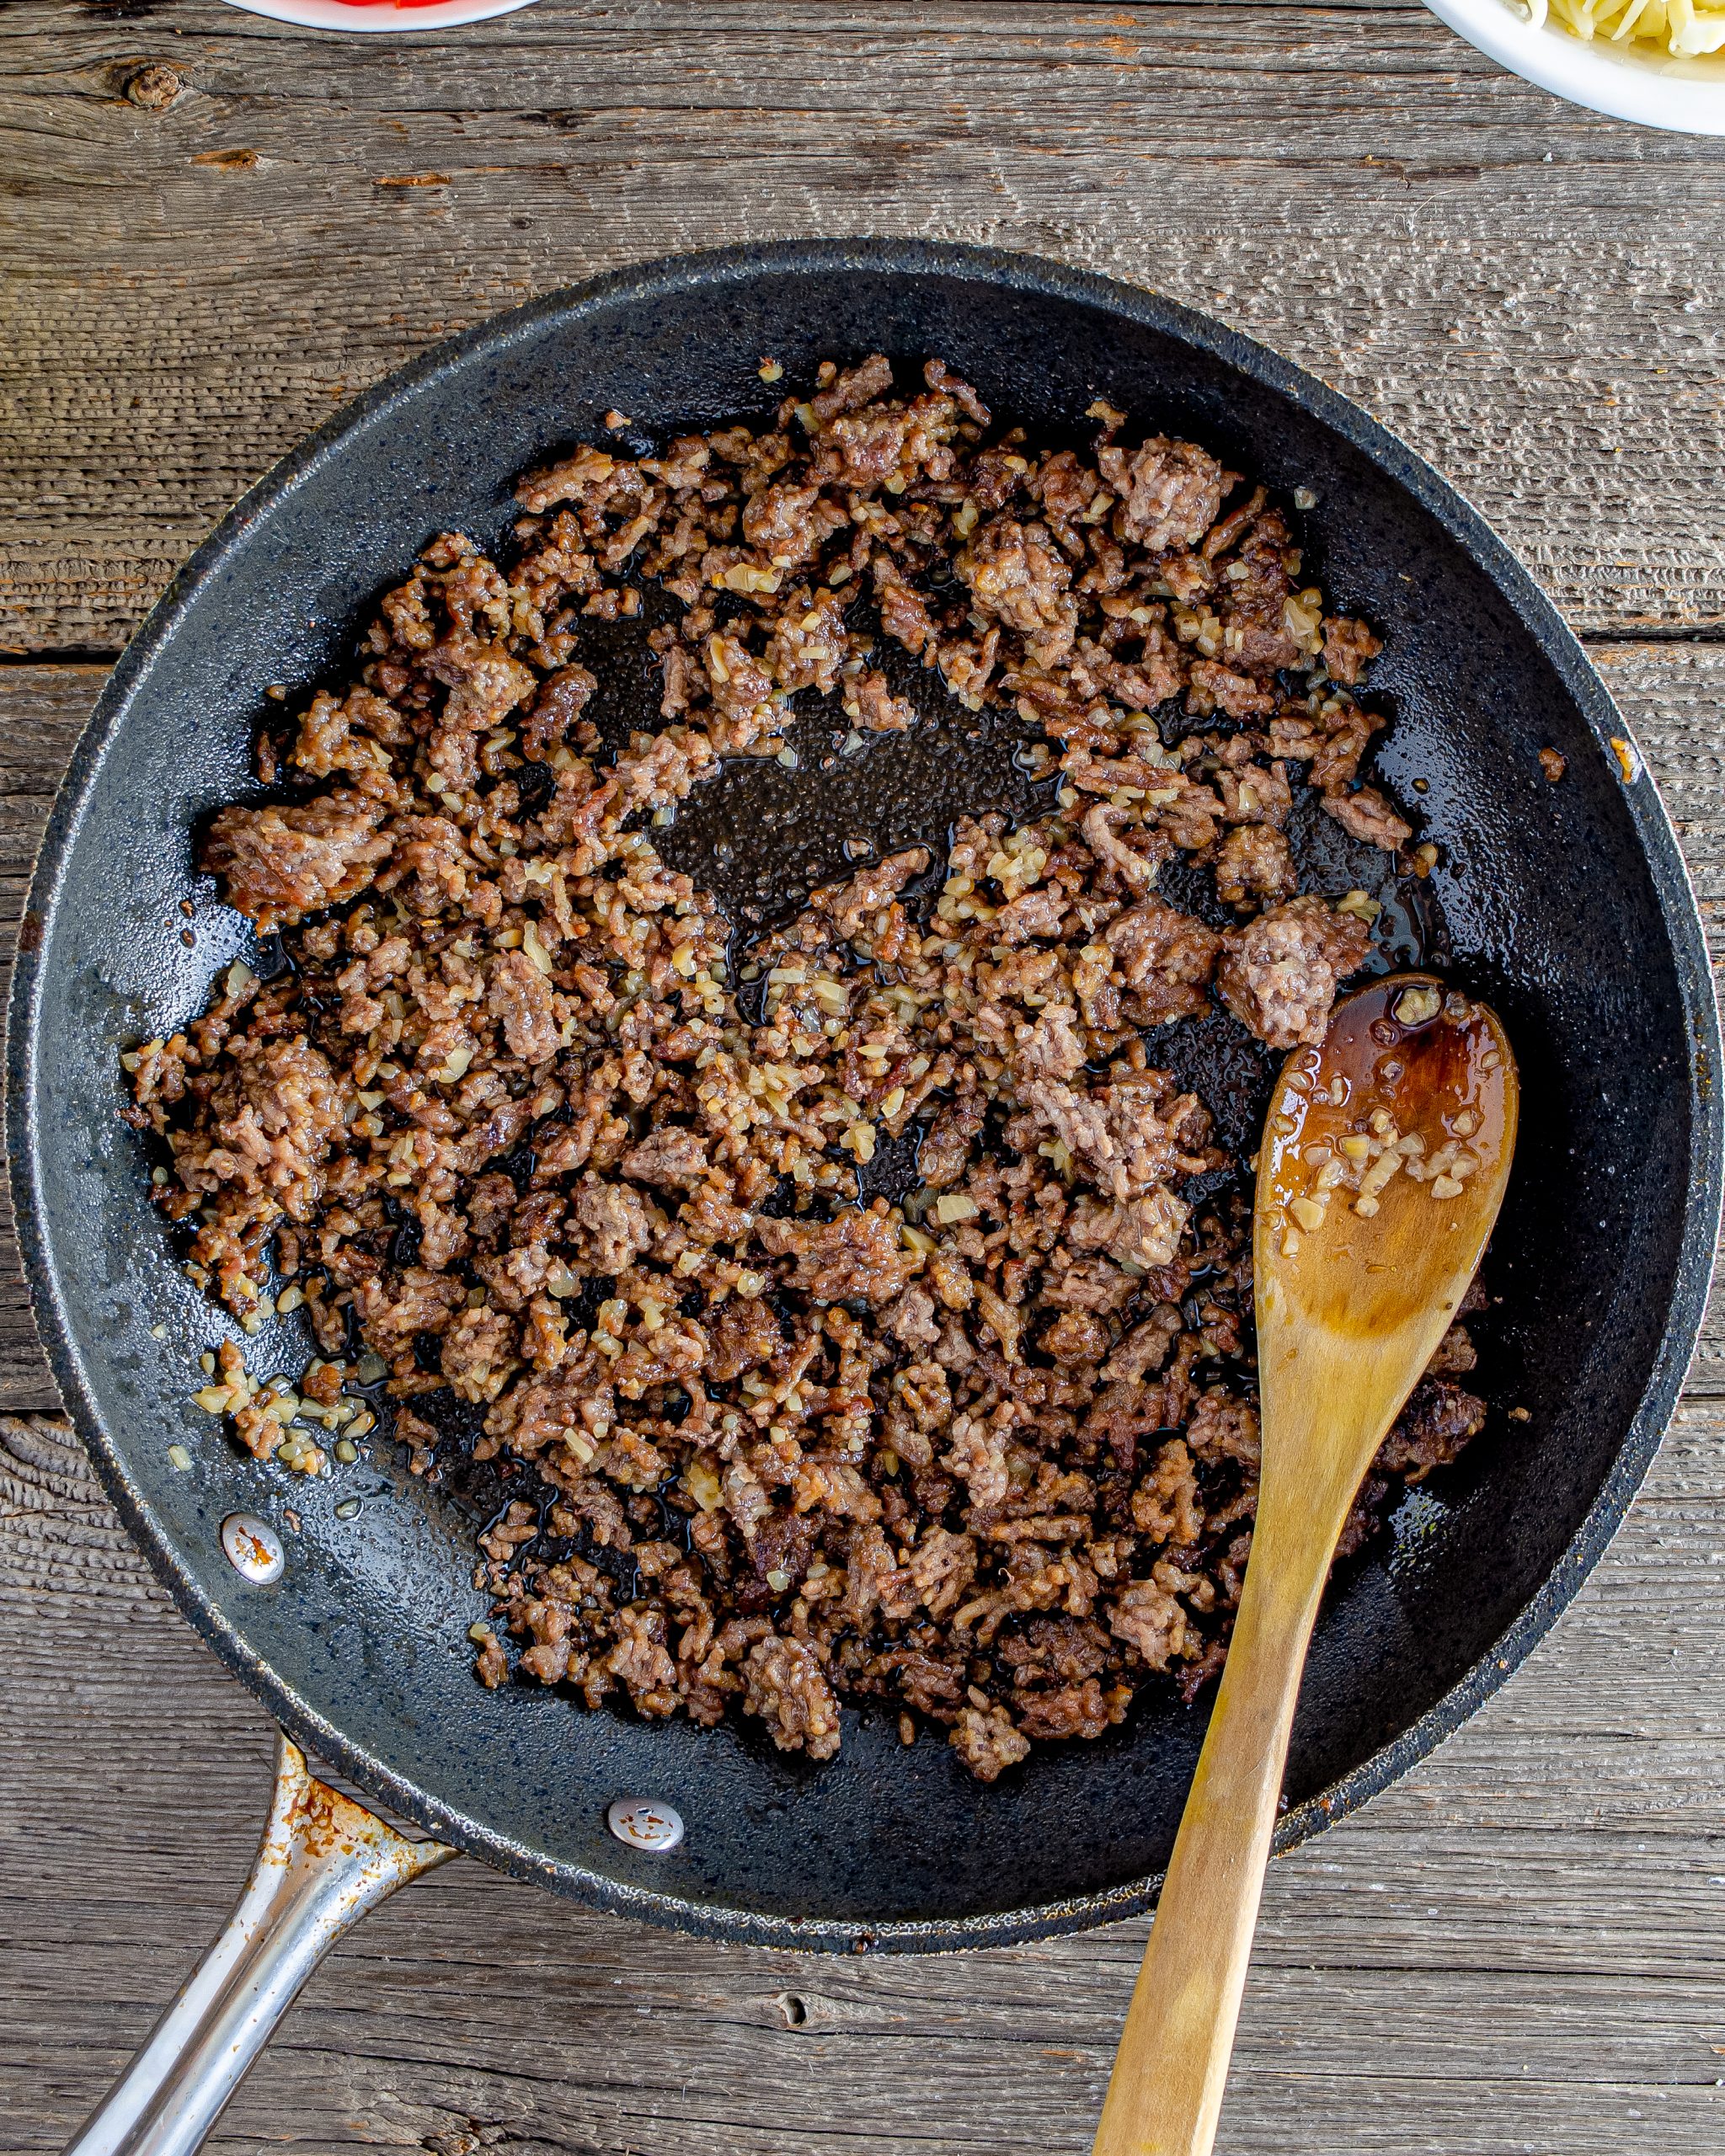 Place the ground beef, onions, and peppers in a large high-sided skillet over medium-high heat. 